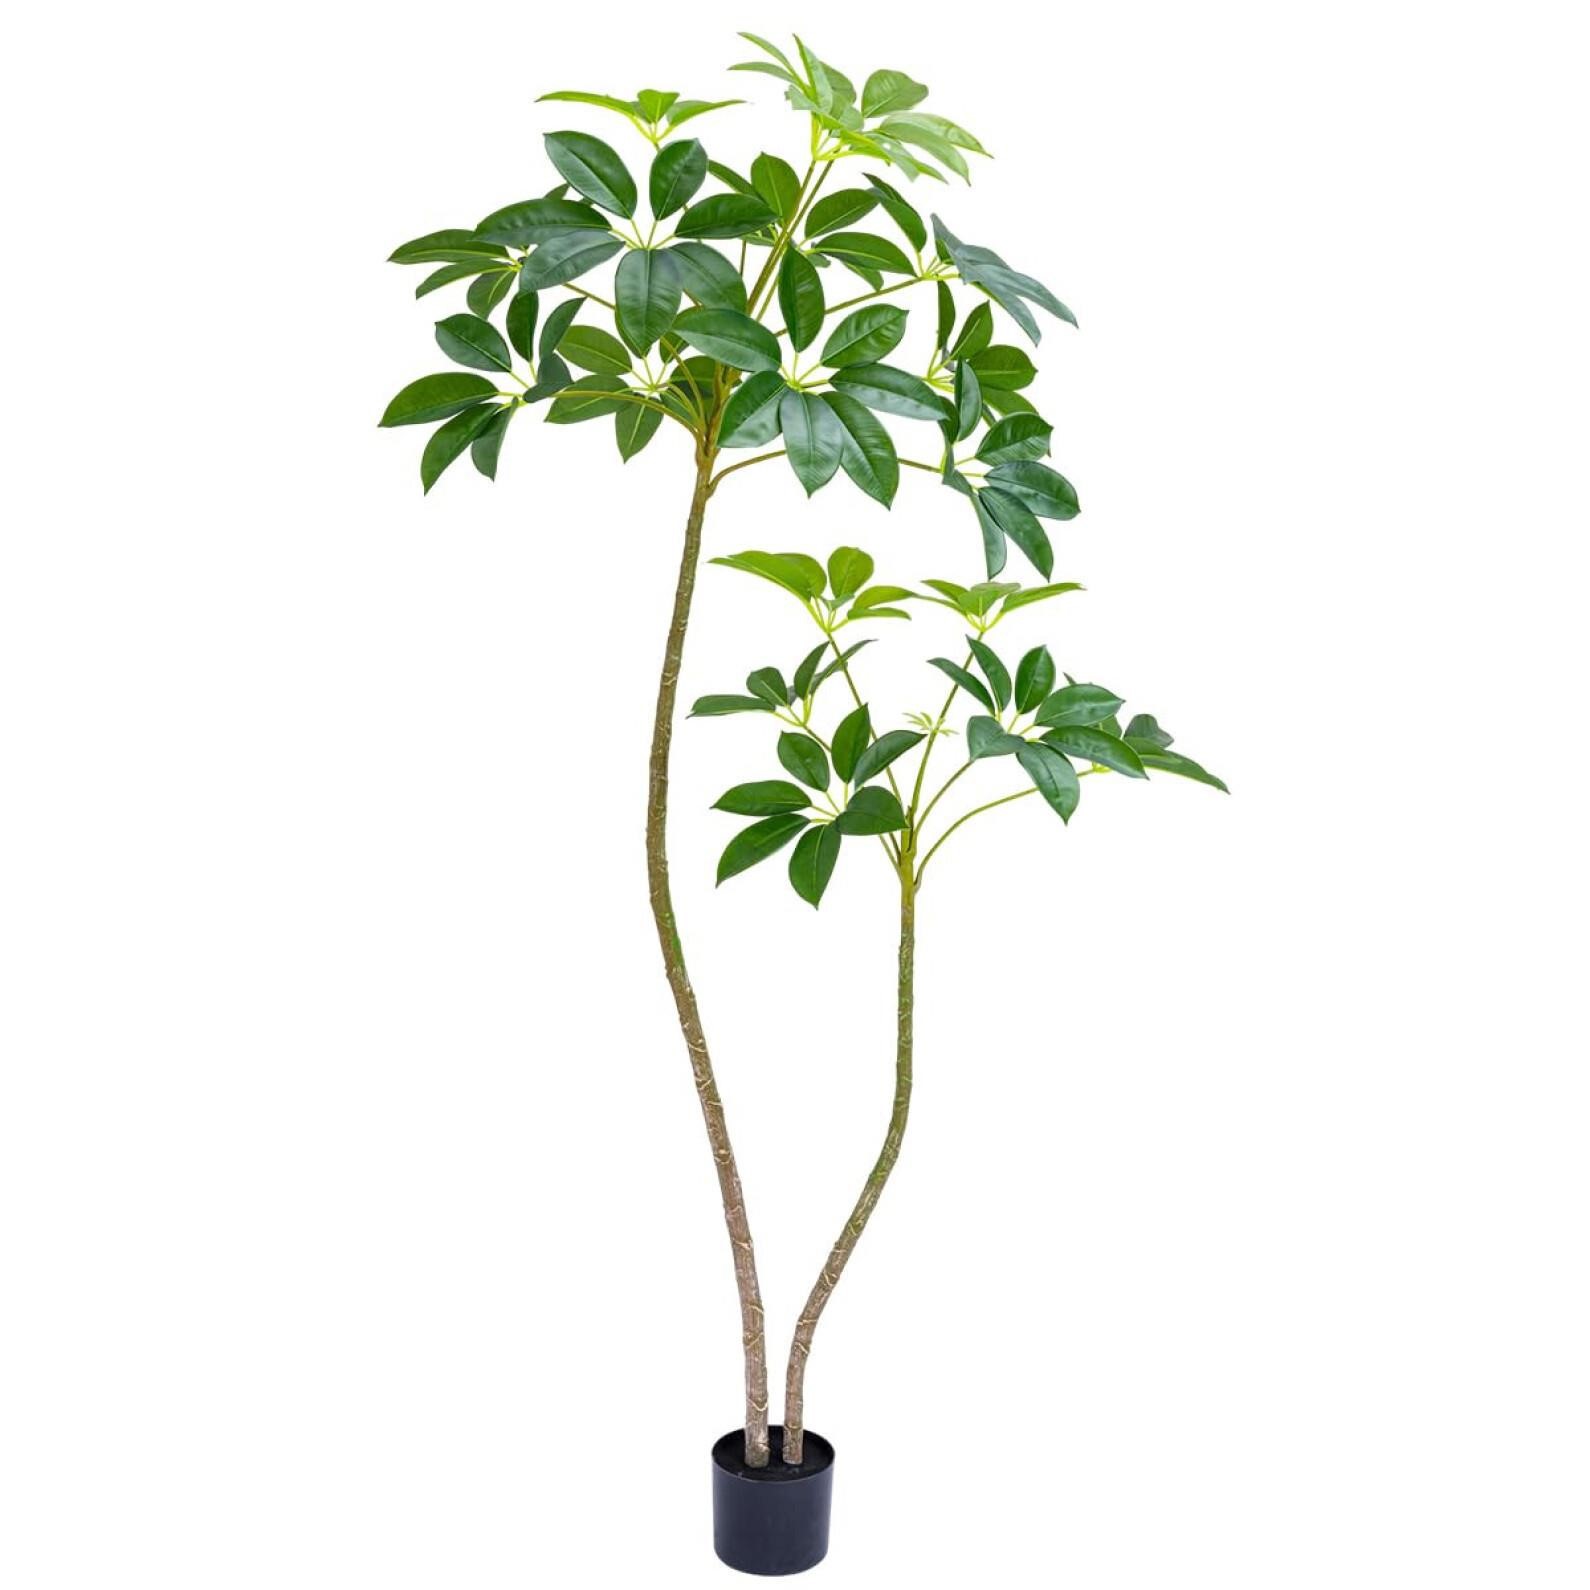 AfanD Artificial umbrella tree,6ft Tall Fake Plant